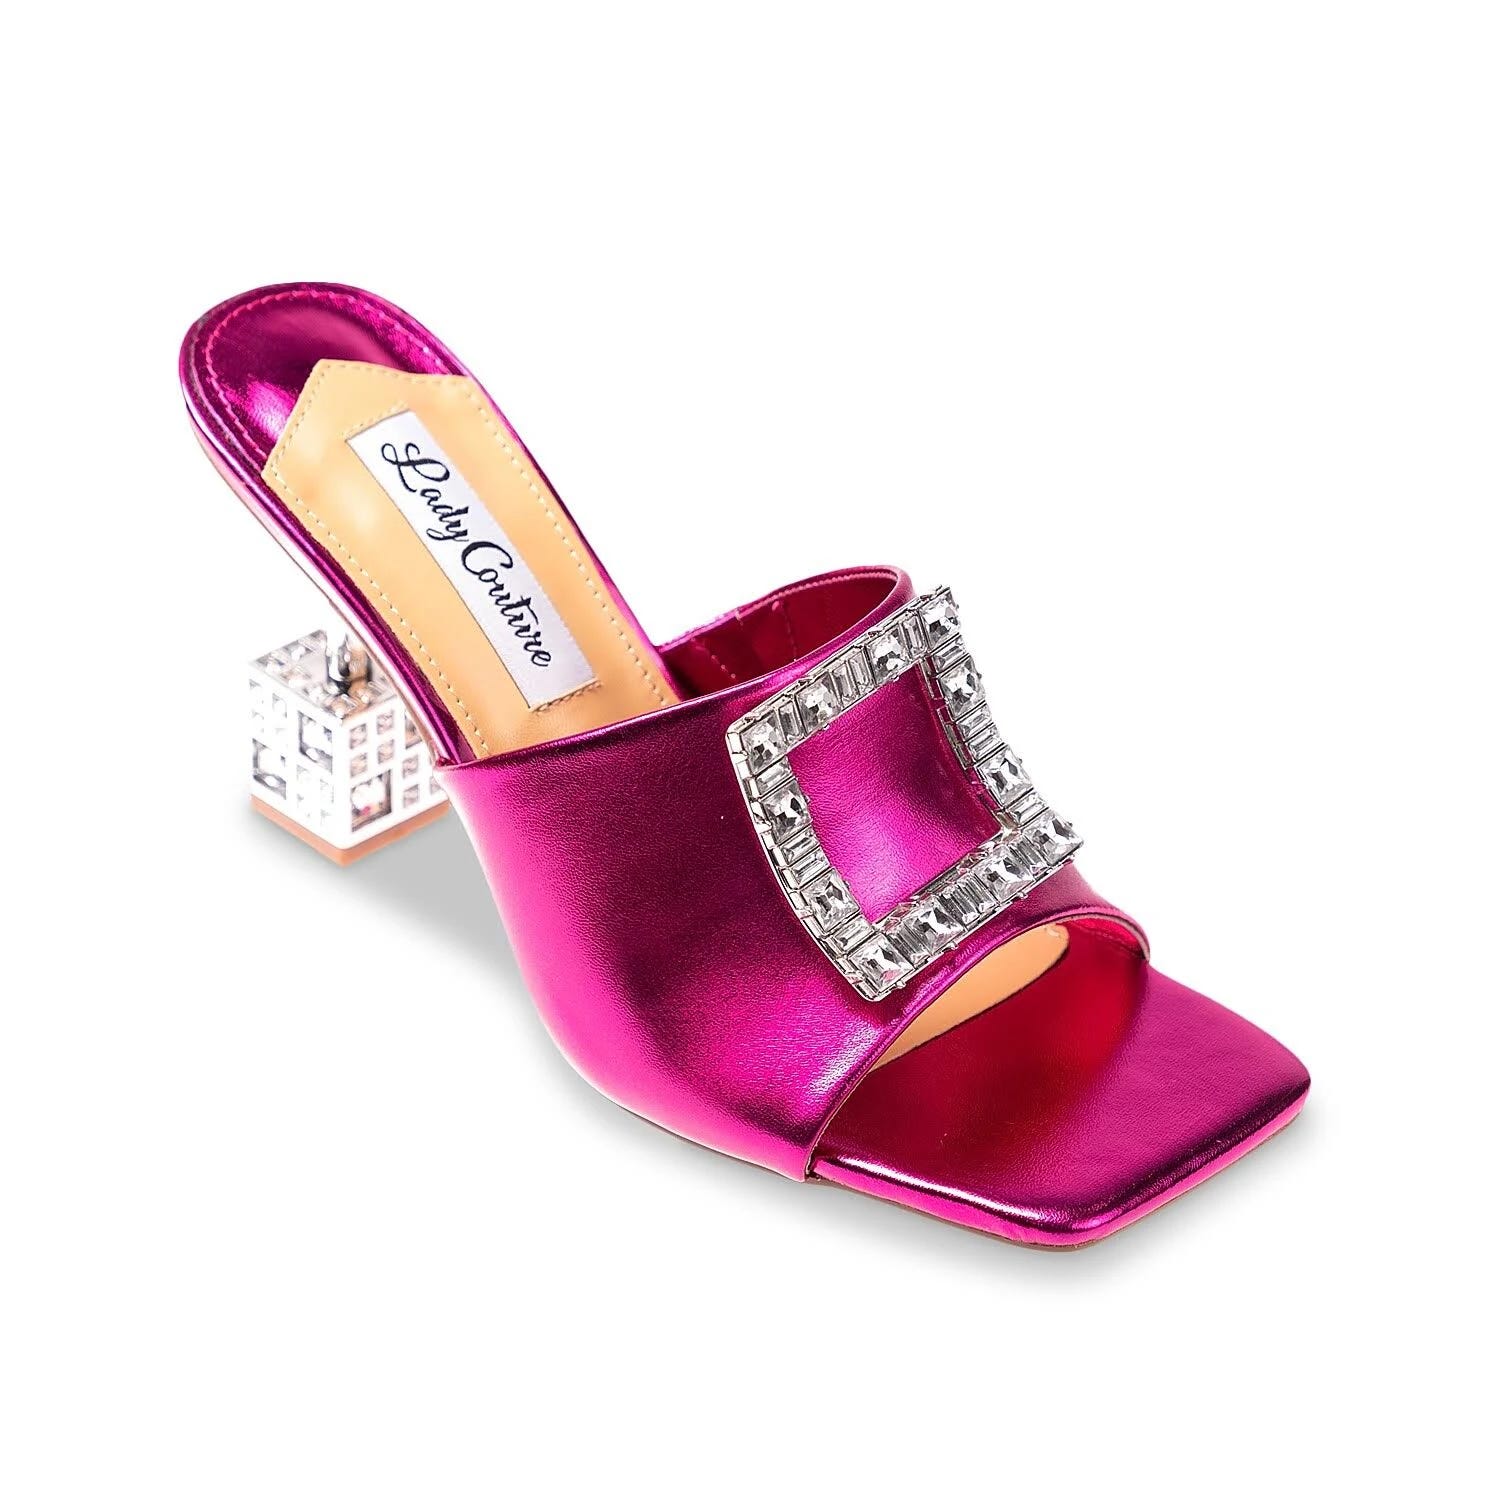 Sparkling Pink Metallic Sandals for the Casino Look | Image